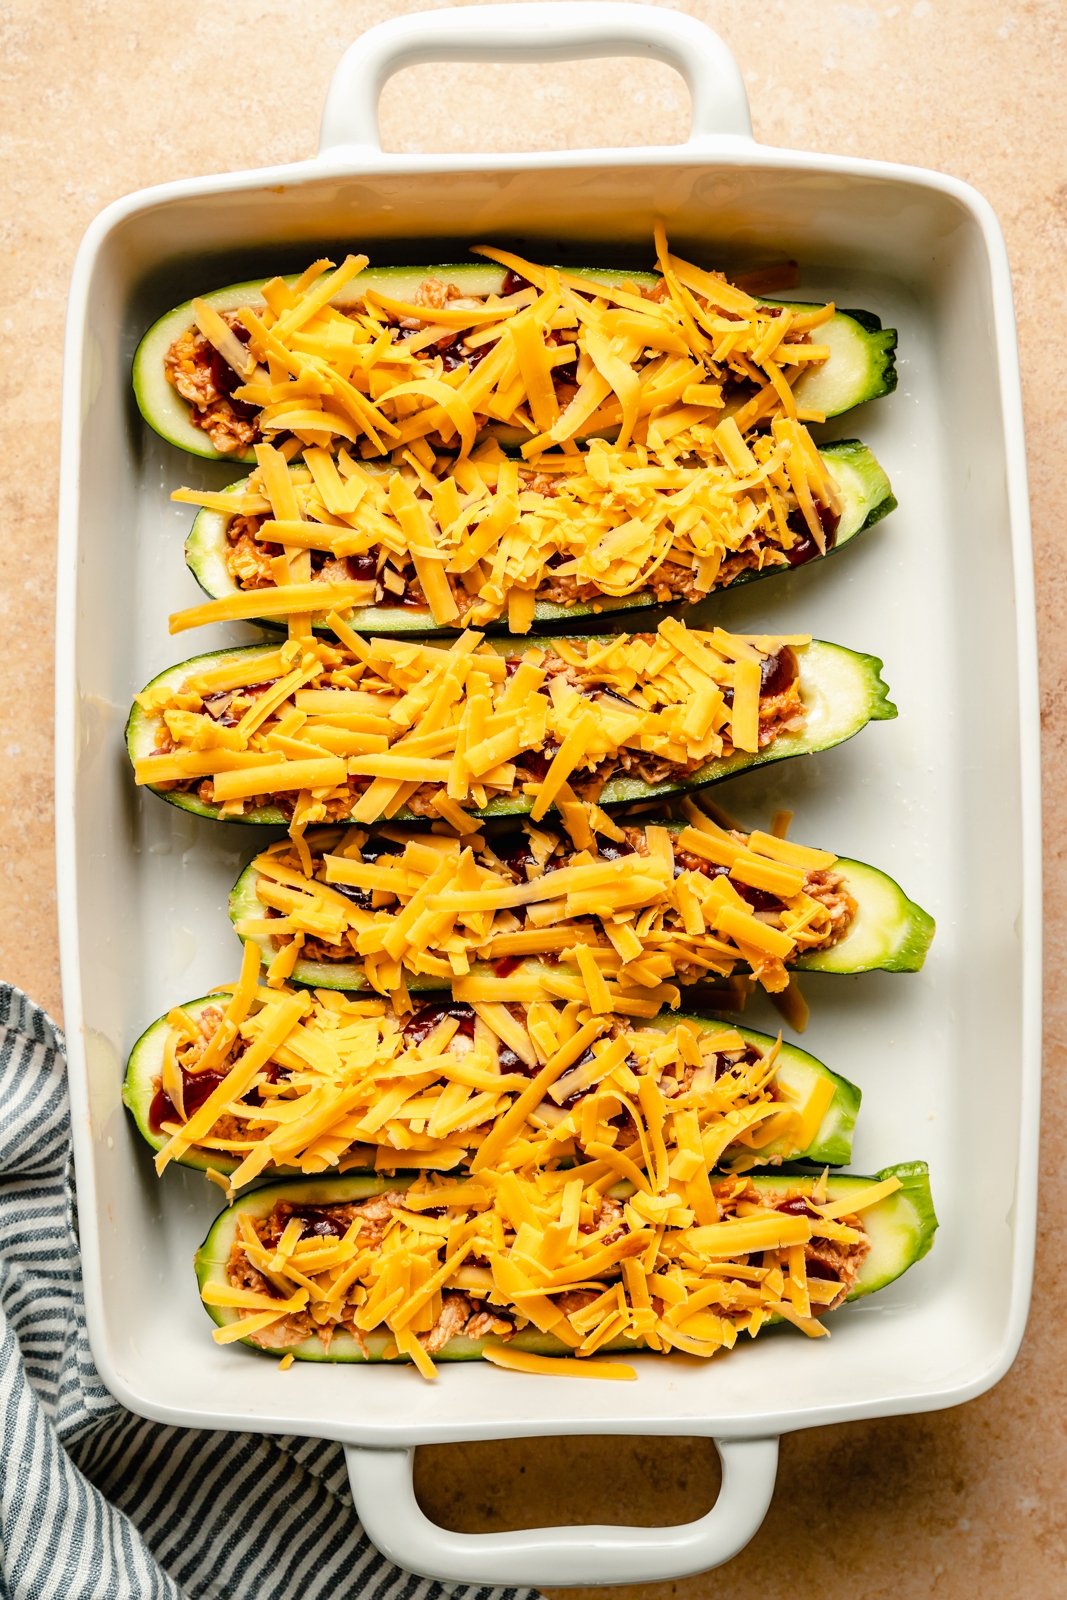 unbaked bbq chicken zucchini boats topped with shredded cheese